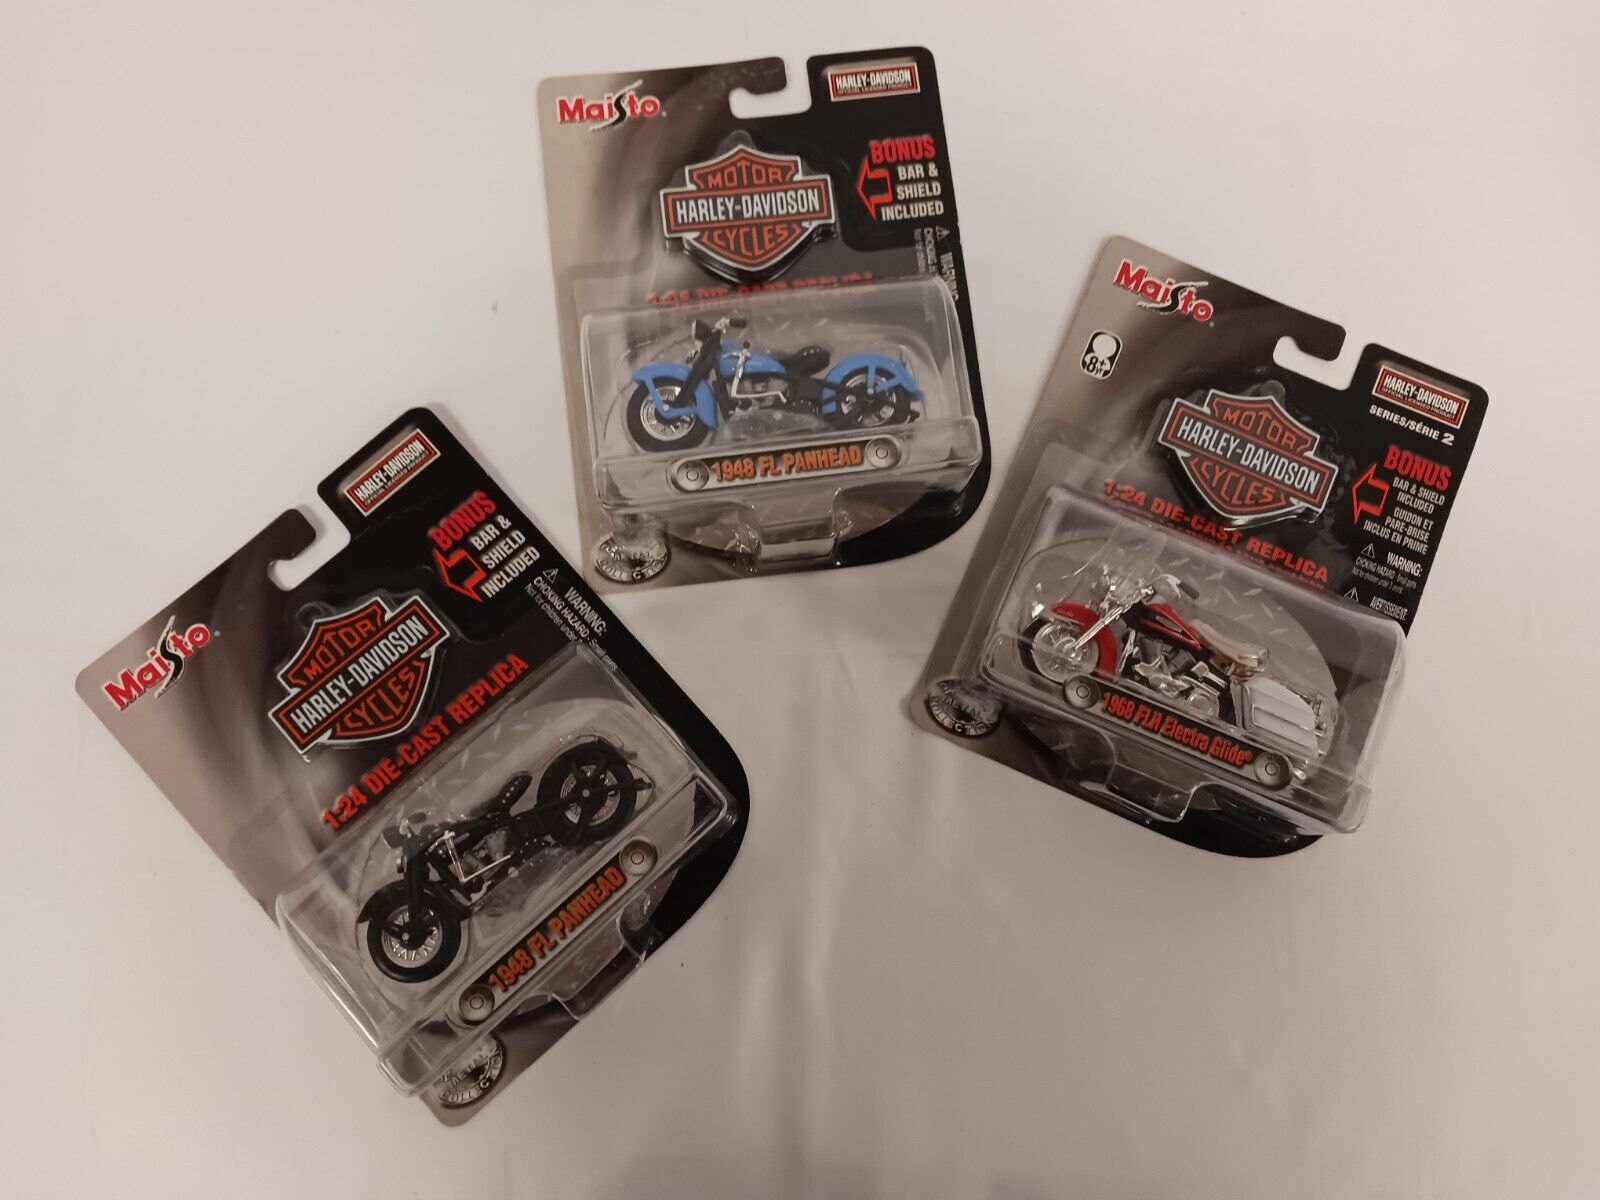 Maisto 1:24 Scale Harley Davidson Die Cast Replica Motorcycles Lot of 3